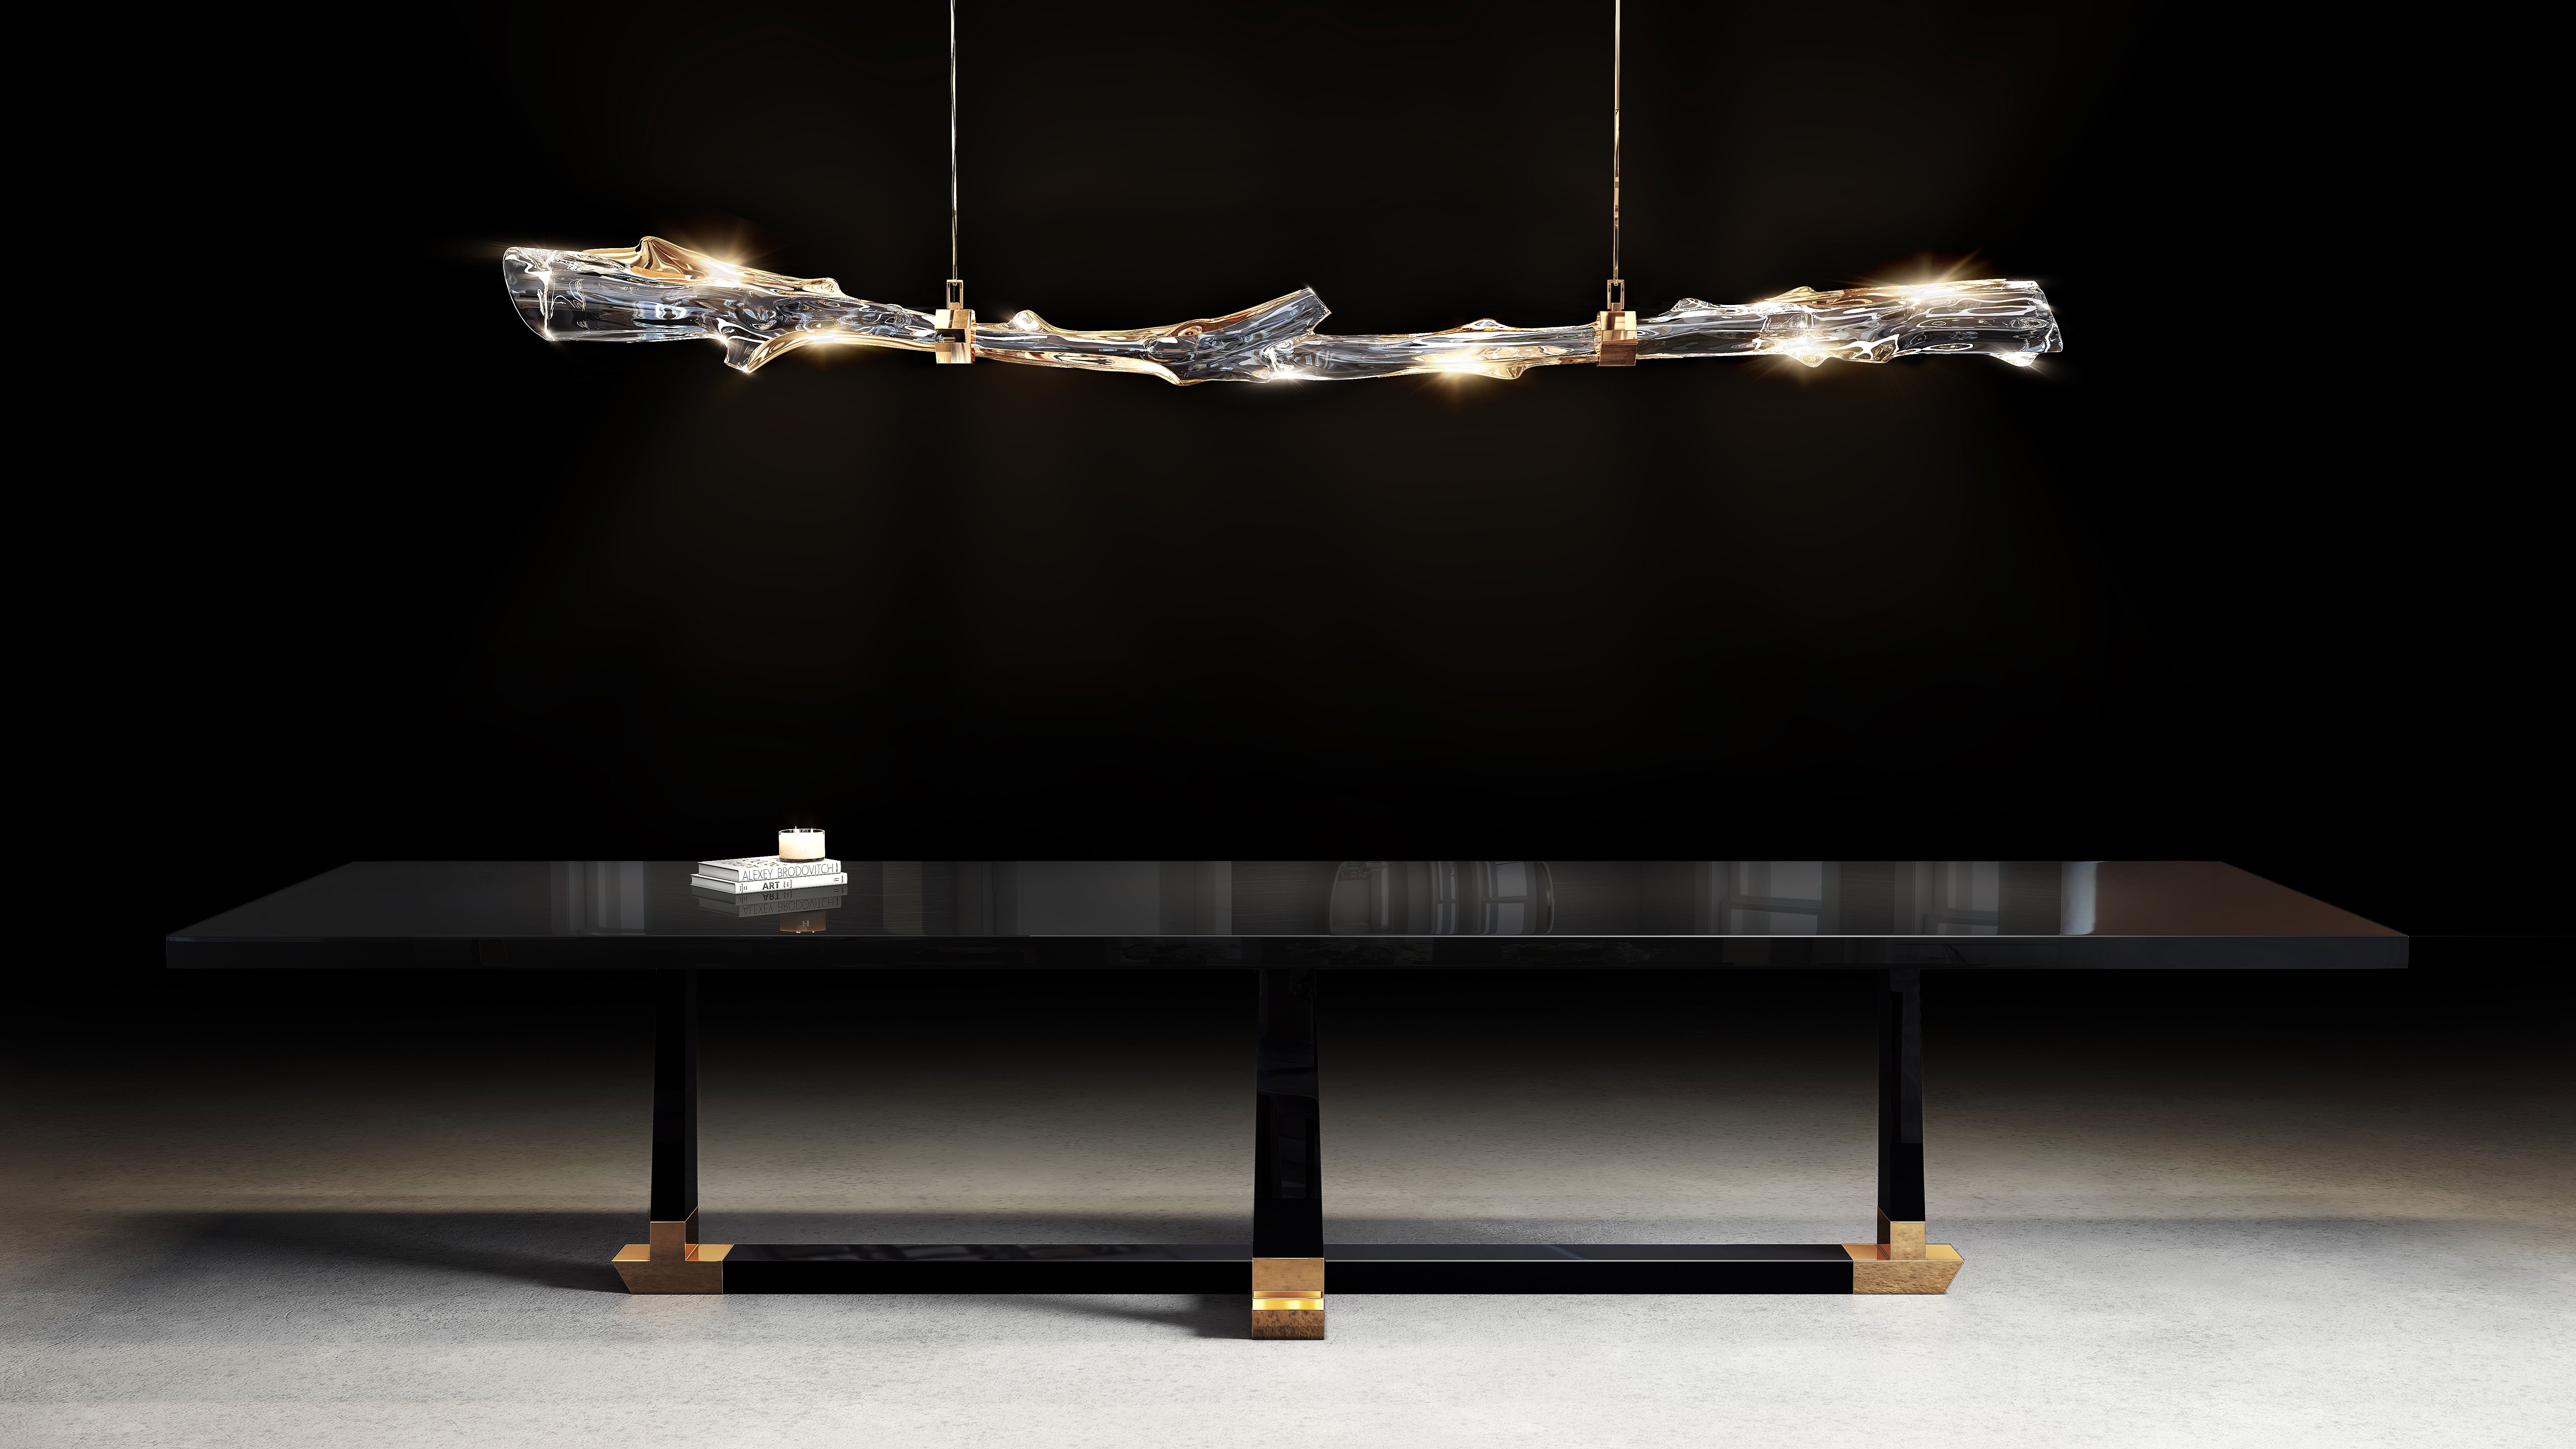 Introducing you to our first 2023 design, Le Branch D’or Chandelier. A namesake, organic piece instigated by Barlas Baylar. Le Branch D’or embraces a sturdy plexi acrylic glass branch with alternating tinges of bronze, complete with custom bronze